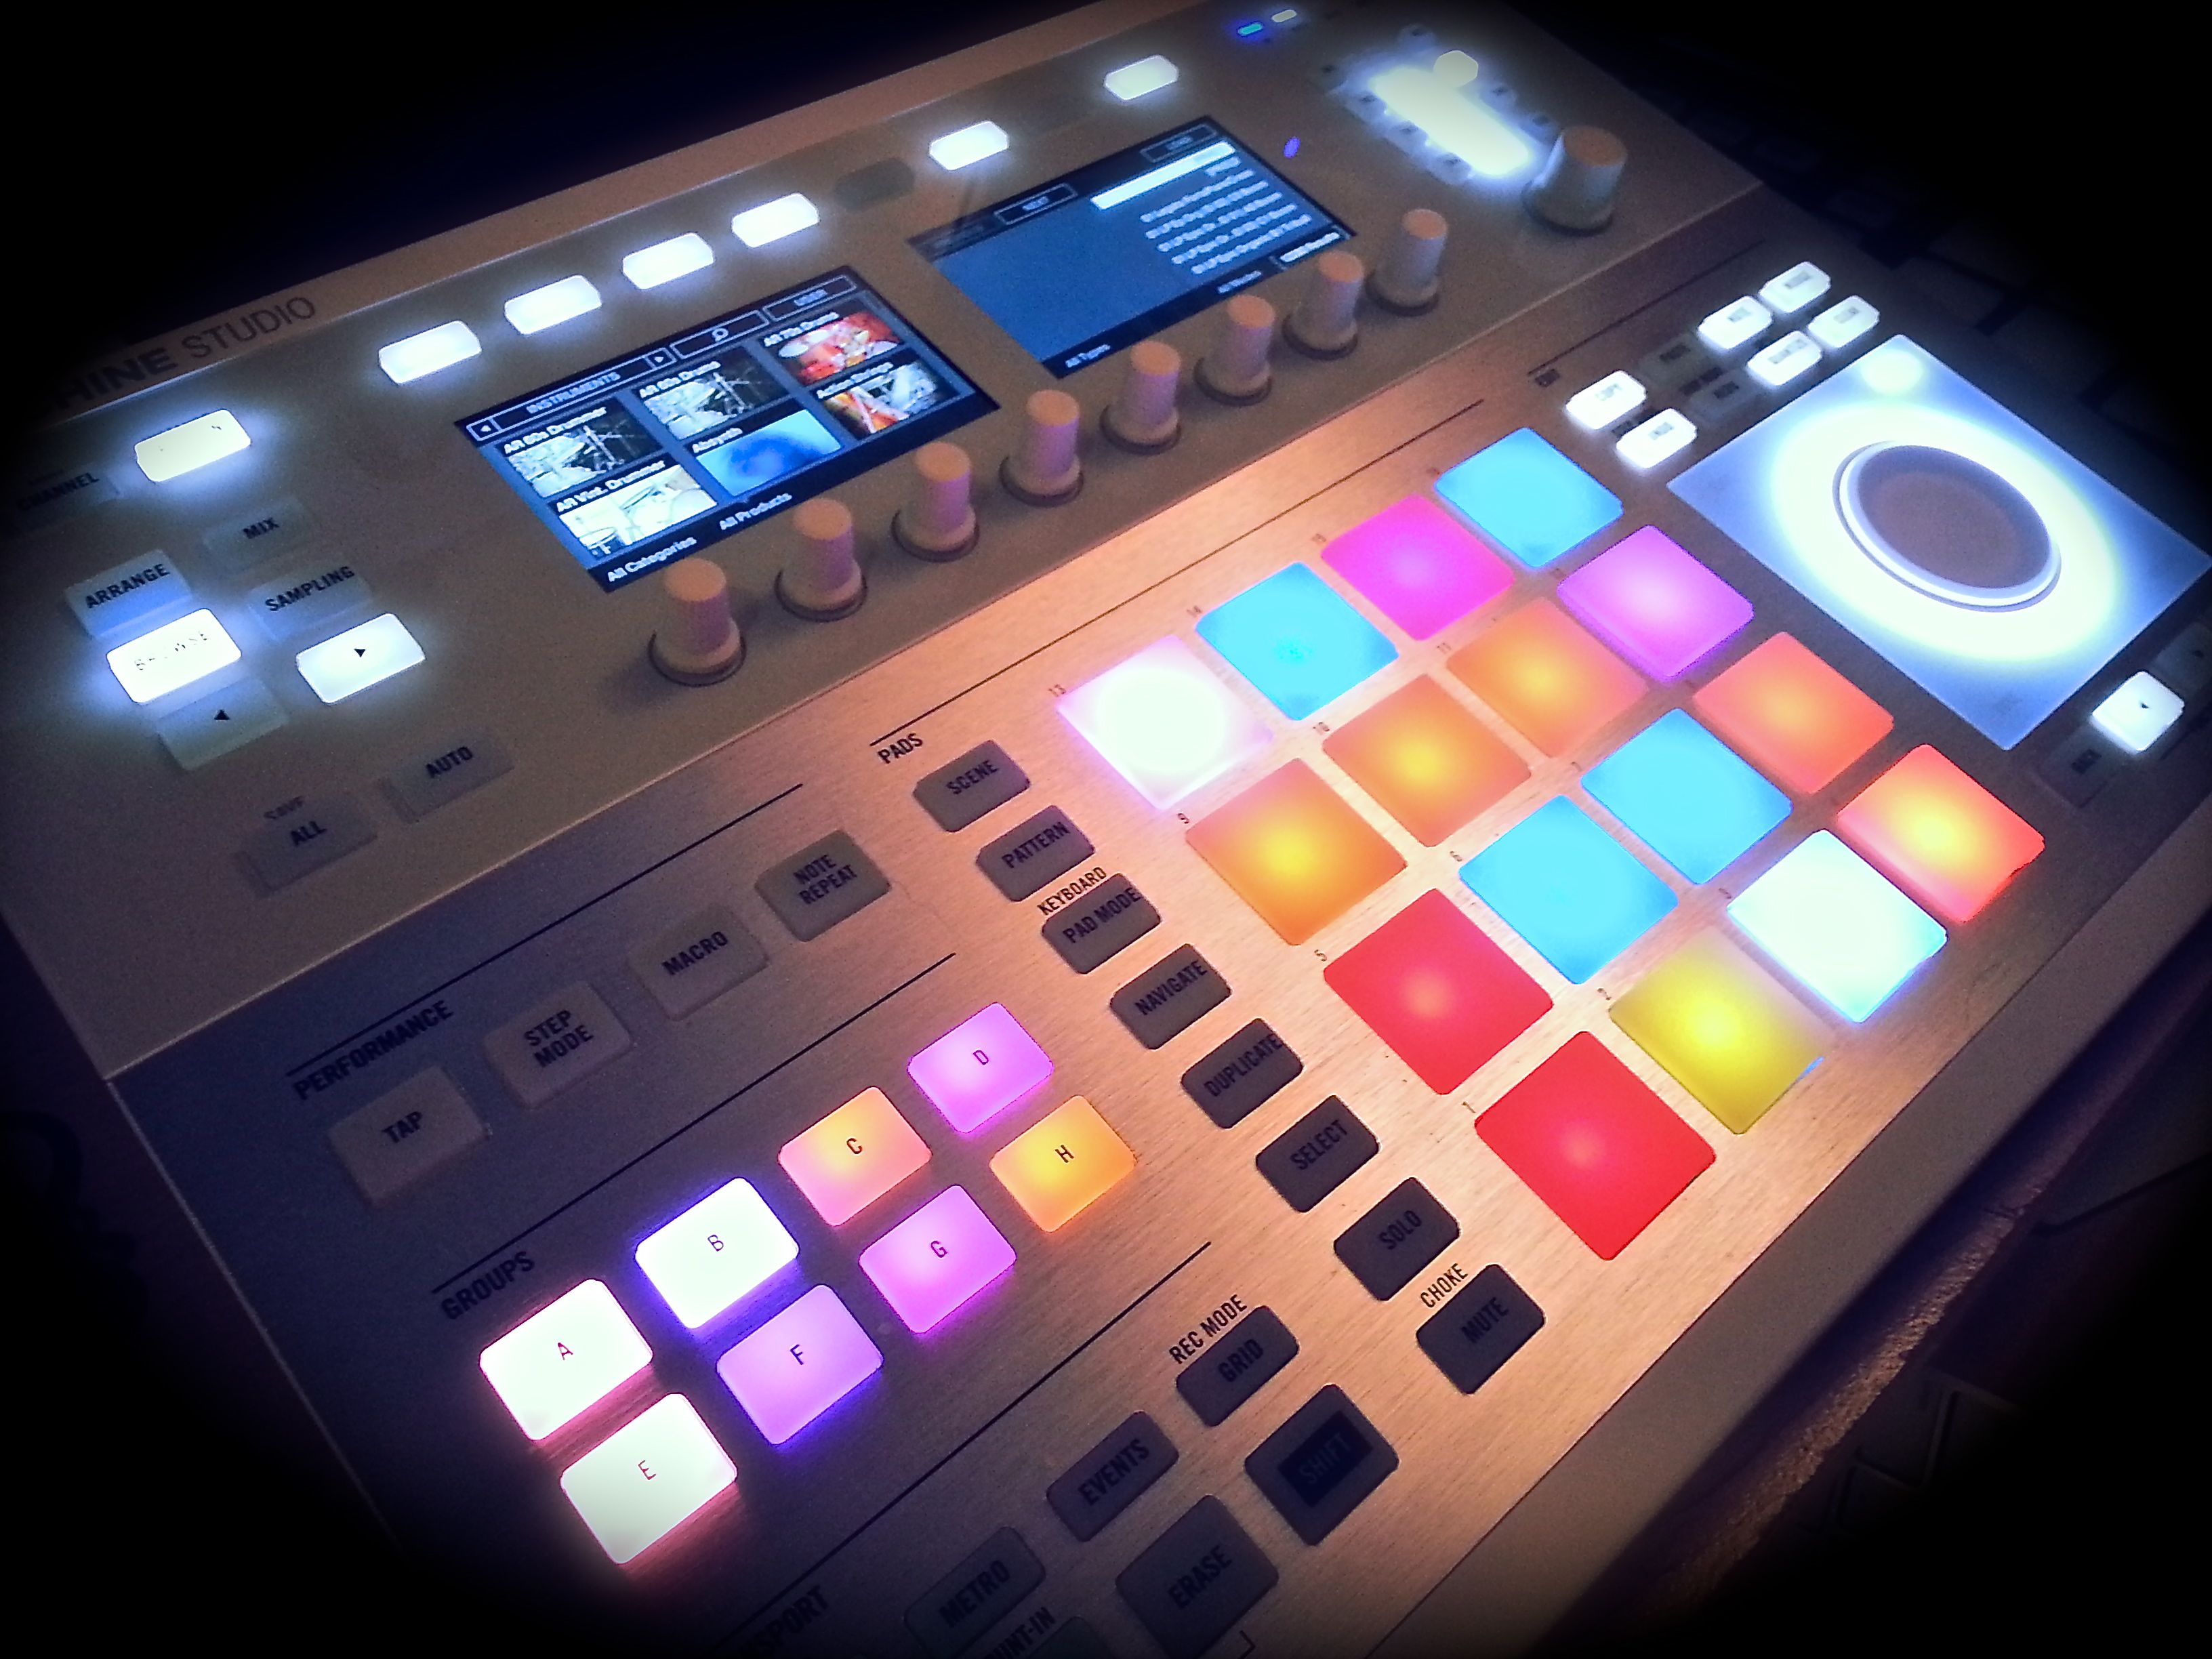 maschine software only